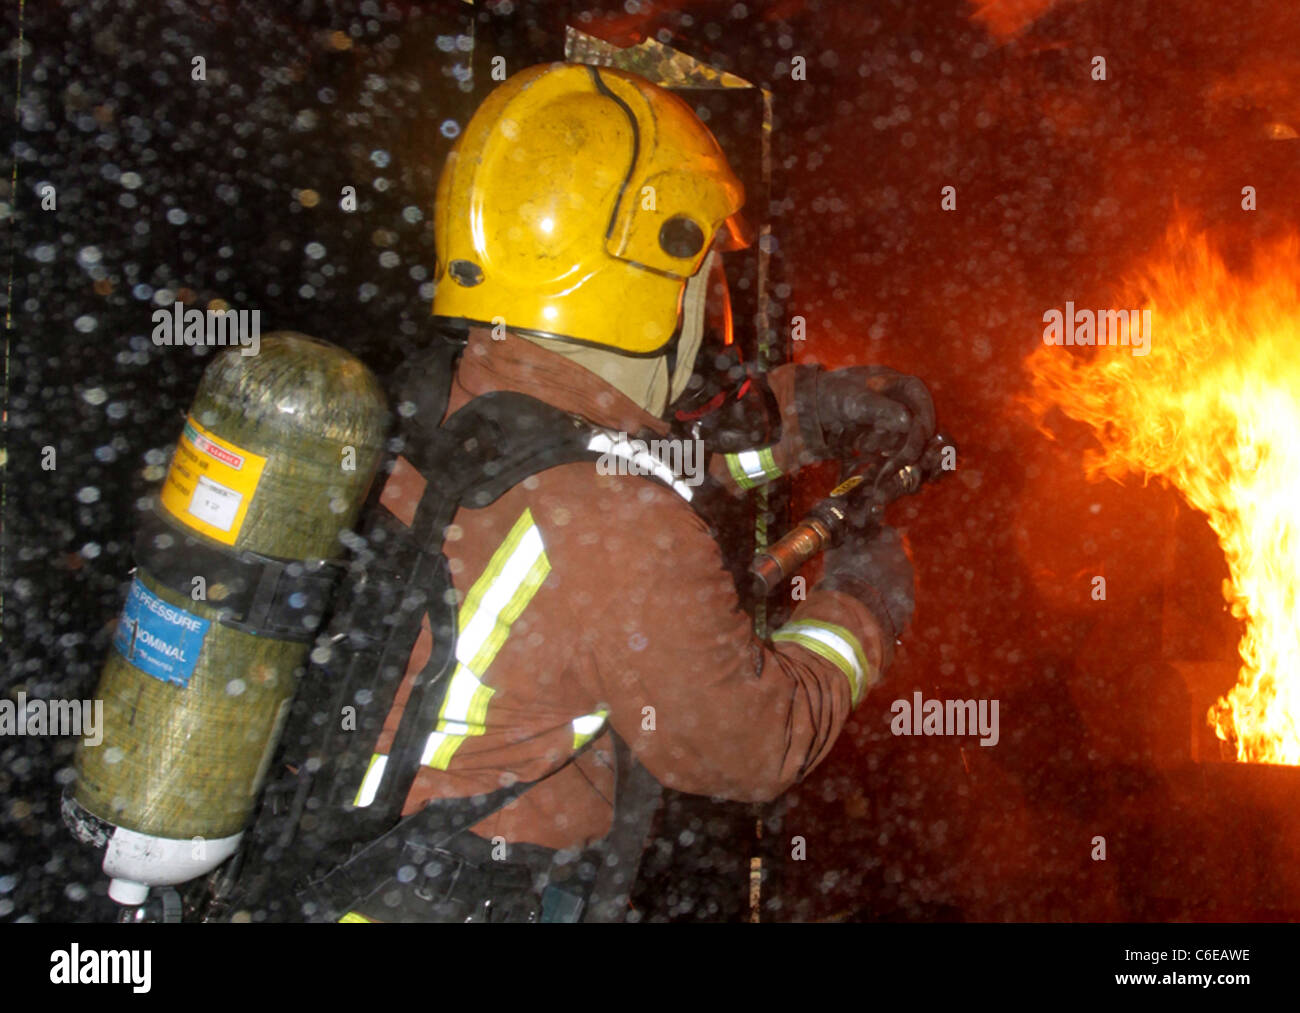 firefighter tackles fire west midlands fire service Stock Photo